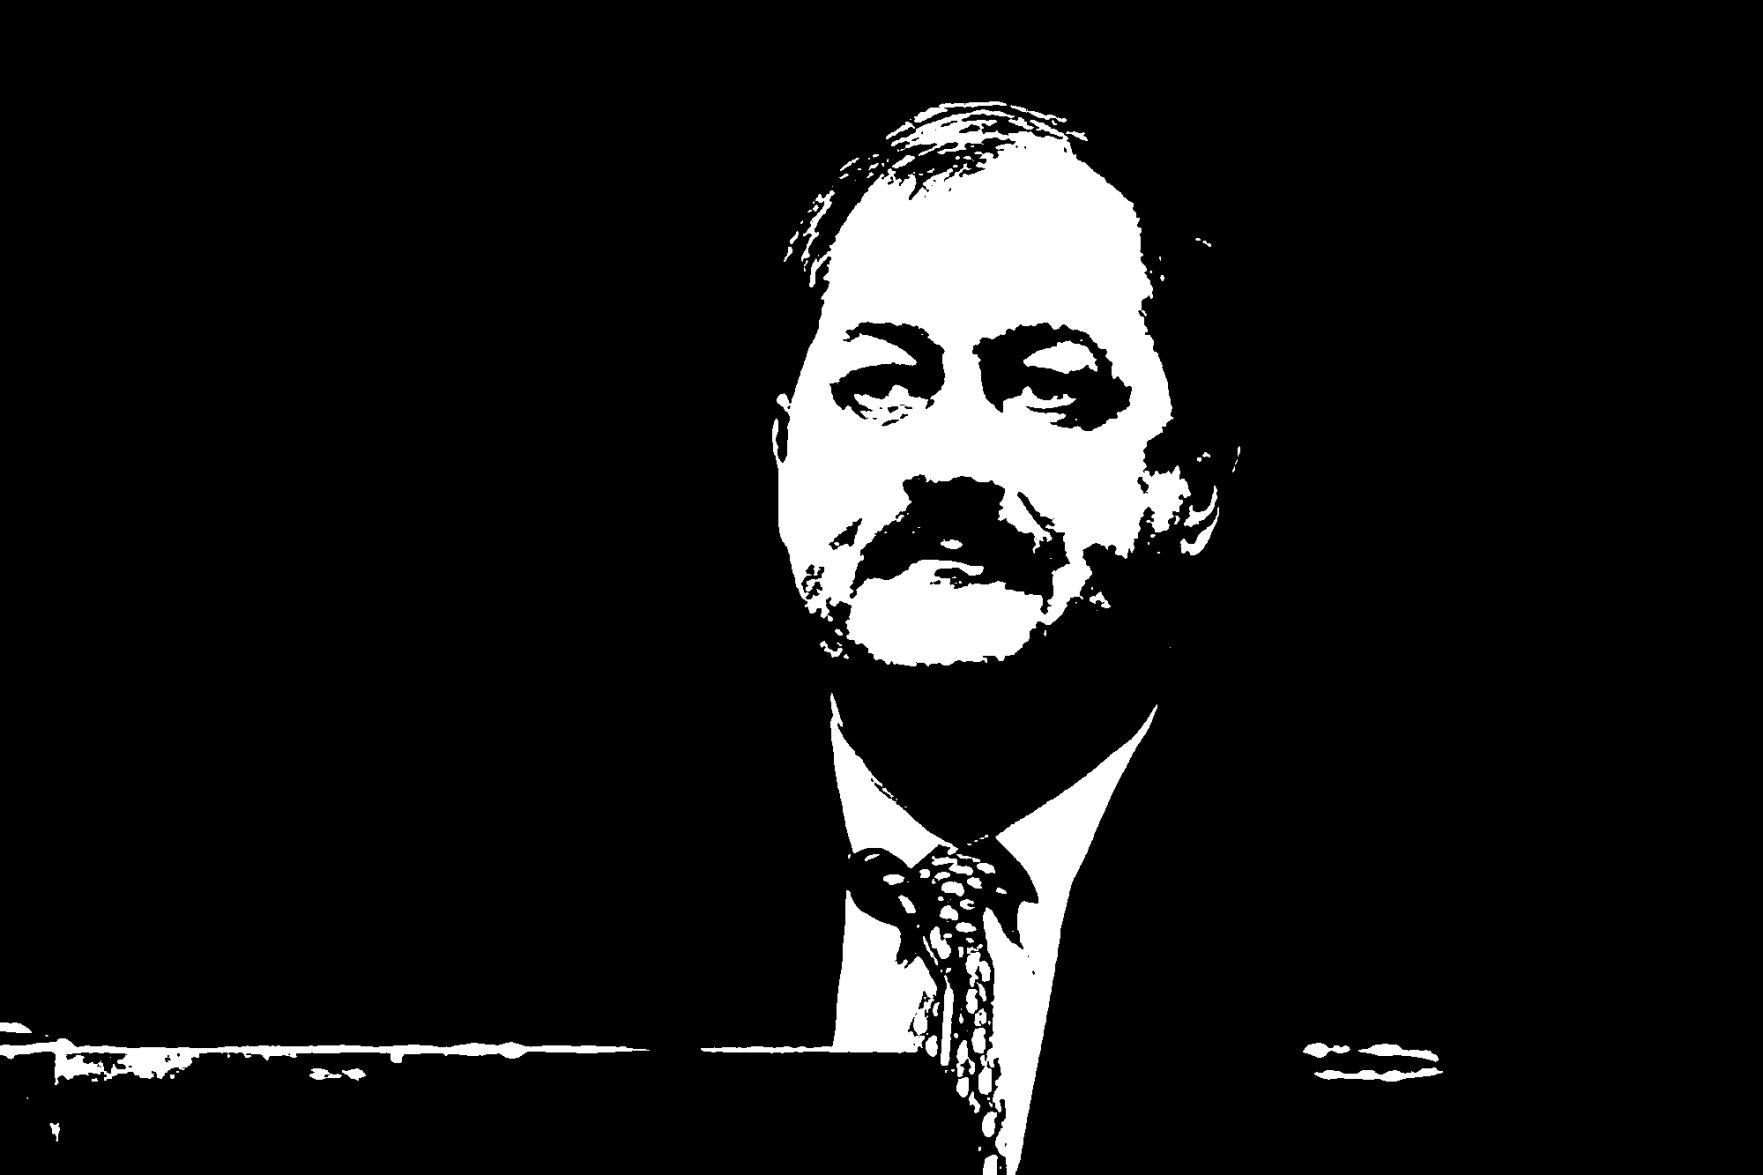 Day of Reckoning, Blankenship on Trial